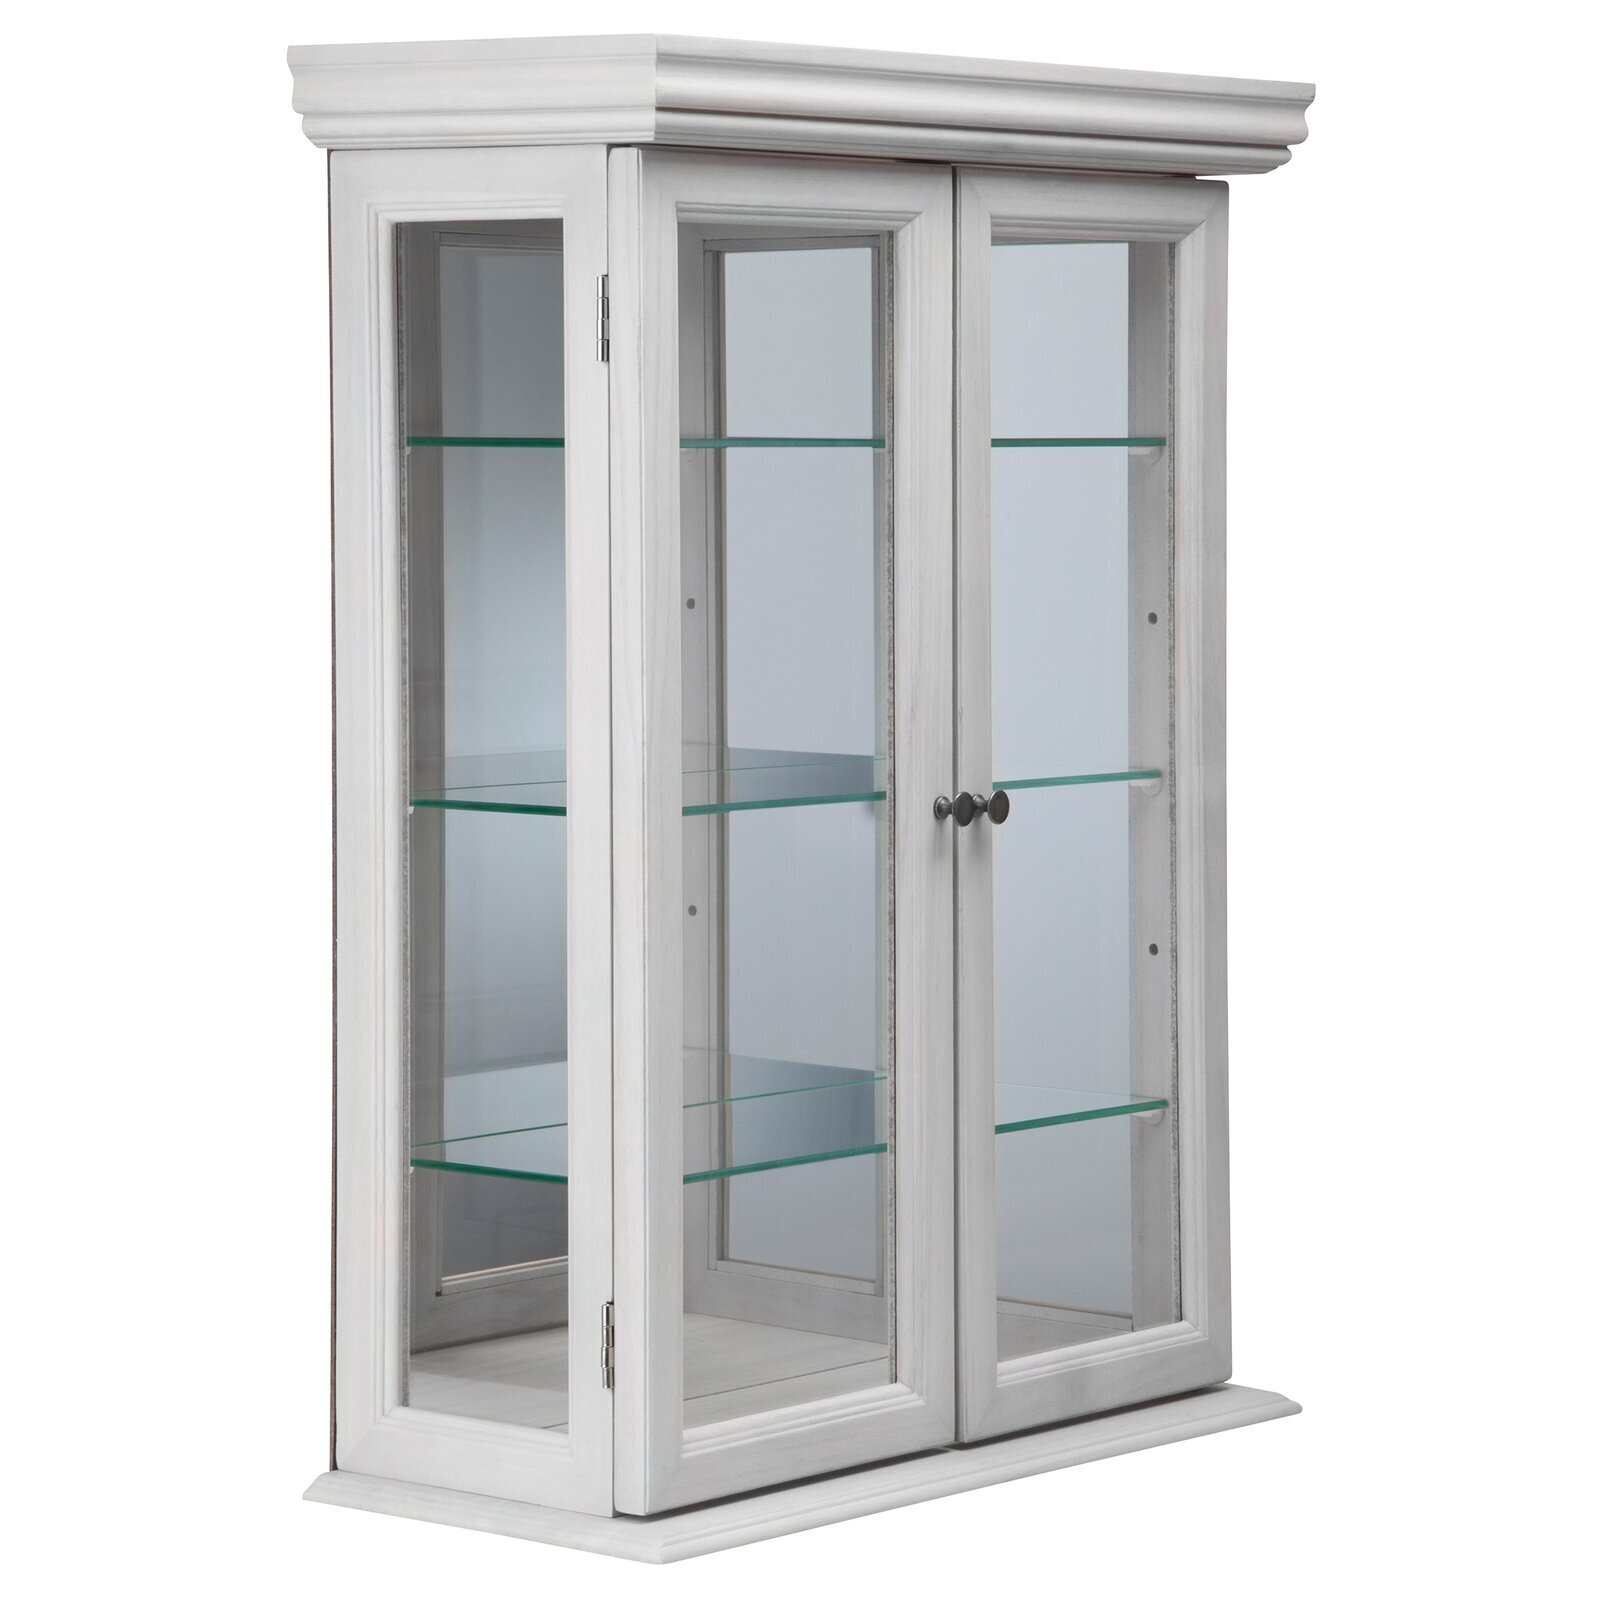 Classic Wall Mount Display Cabinet with Glass Doors